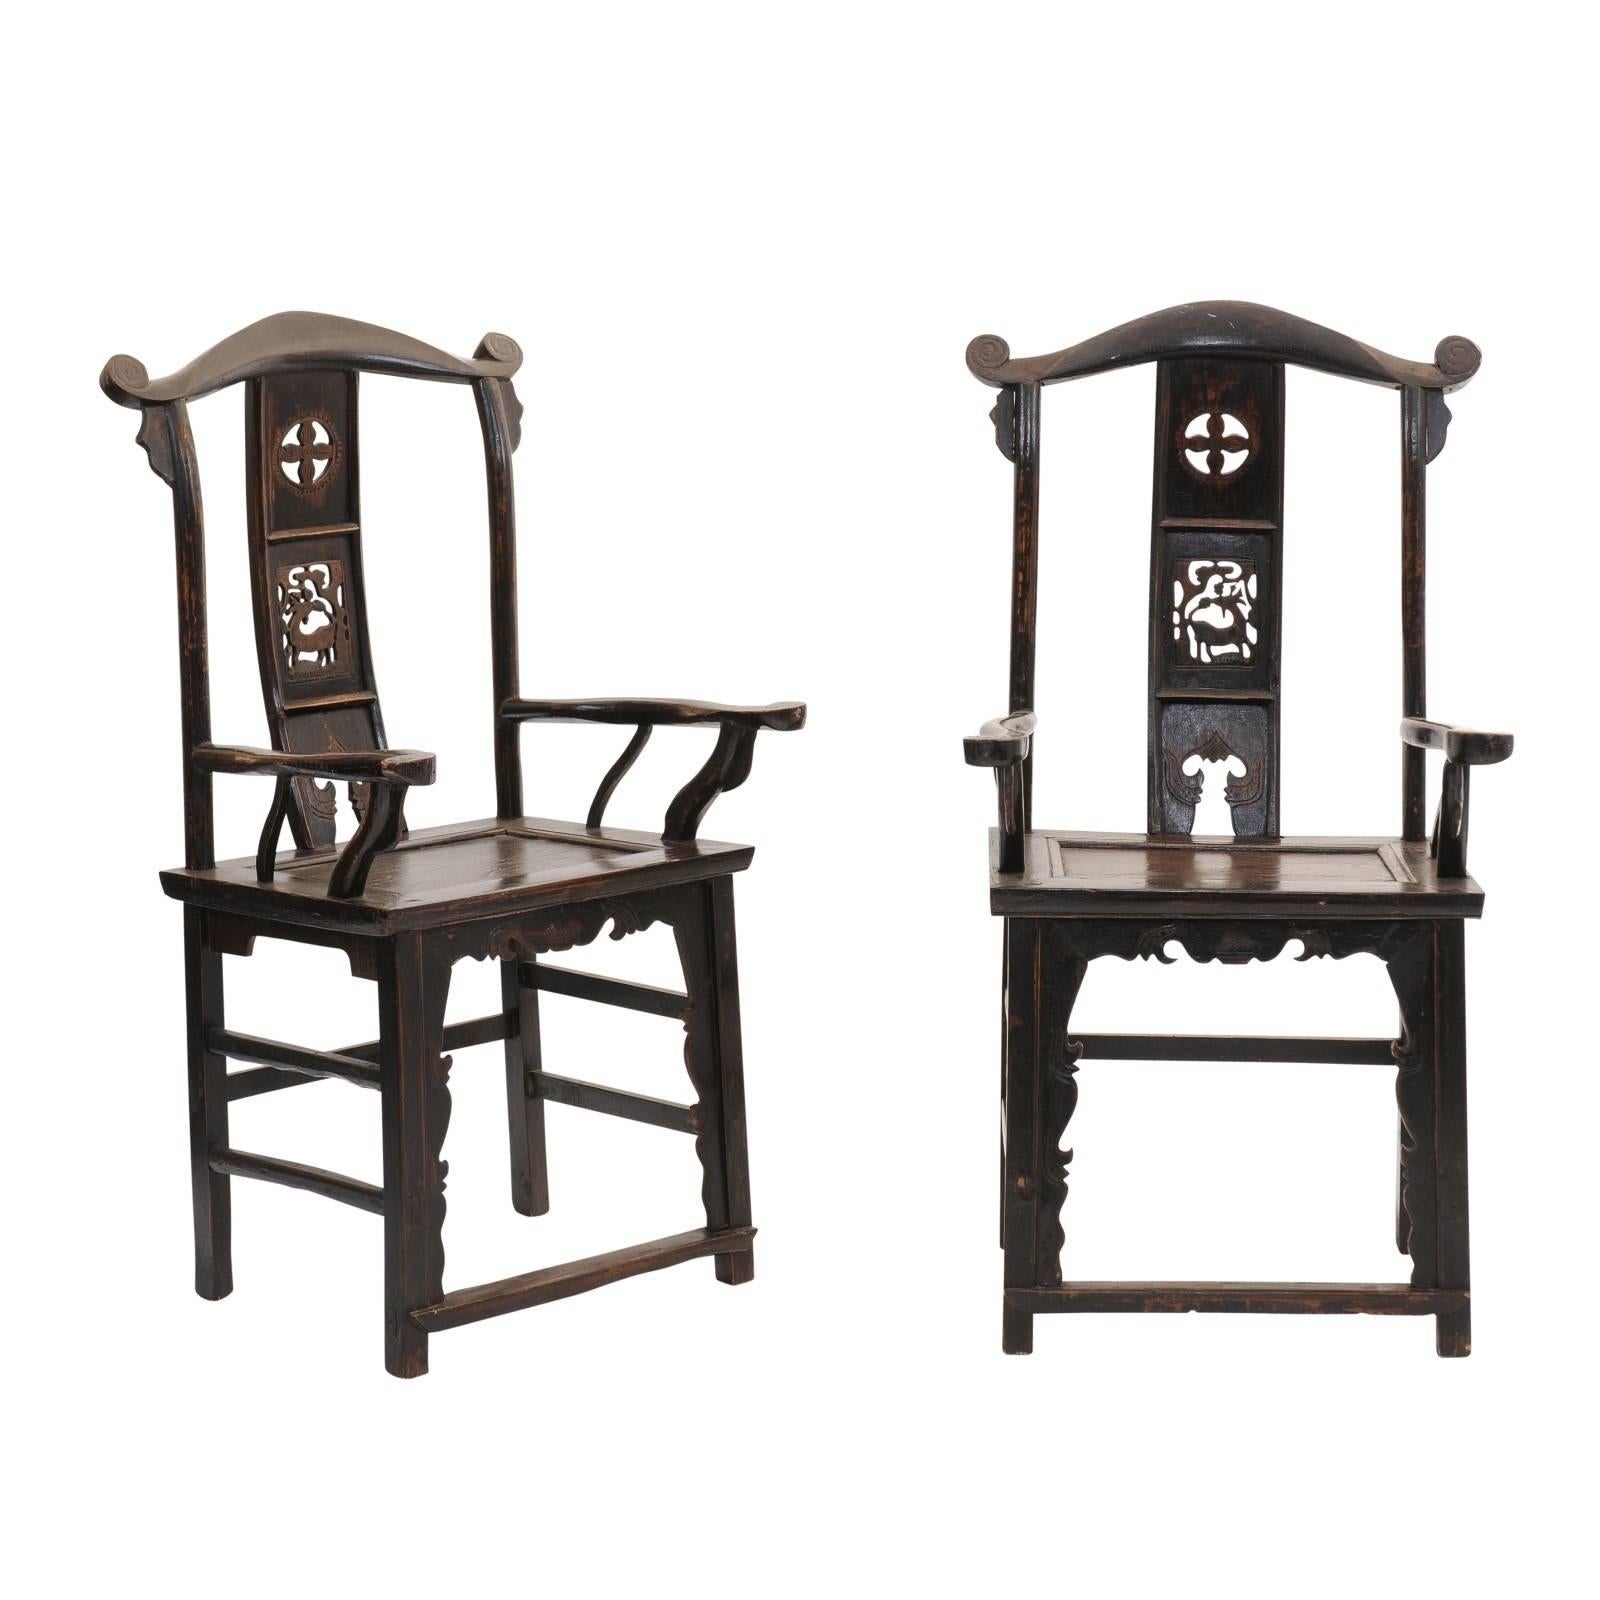 Pair of Chinoiserie Late 19th Century Wooden Carved Chairs with Dark Finish